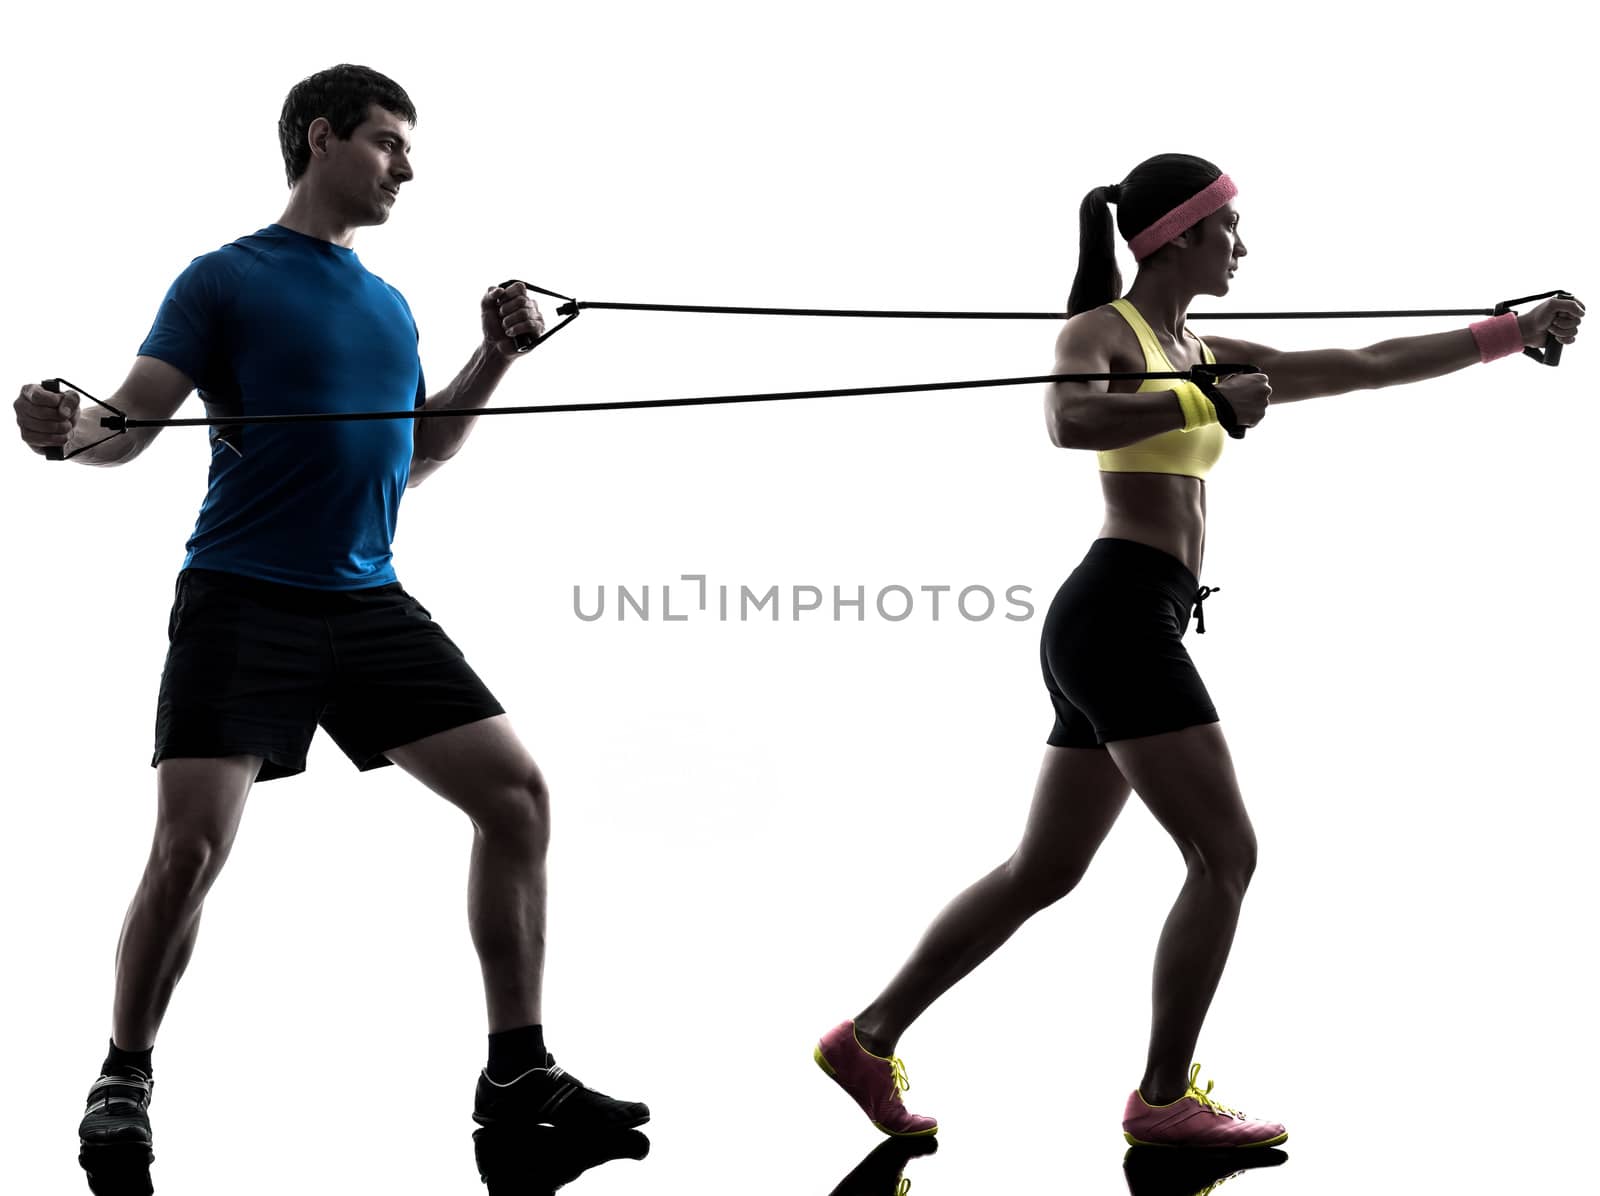 one  woman exercising resistance  rubber band fitness workout with man coach in silhouette  on white background